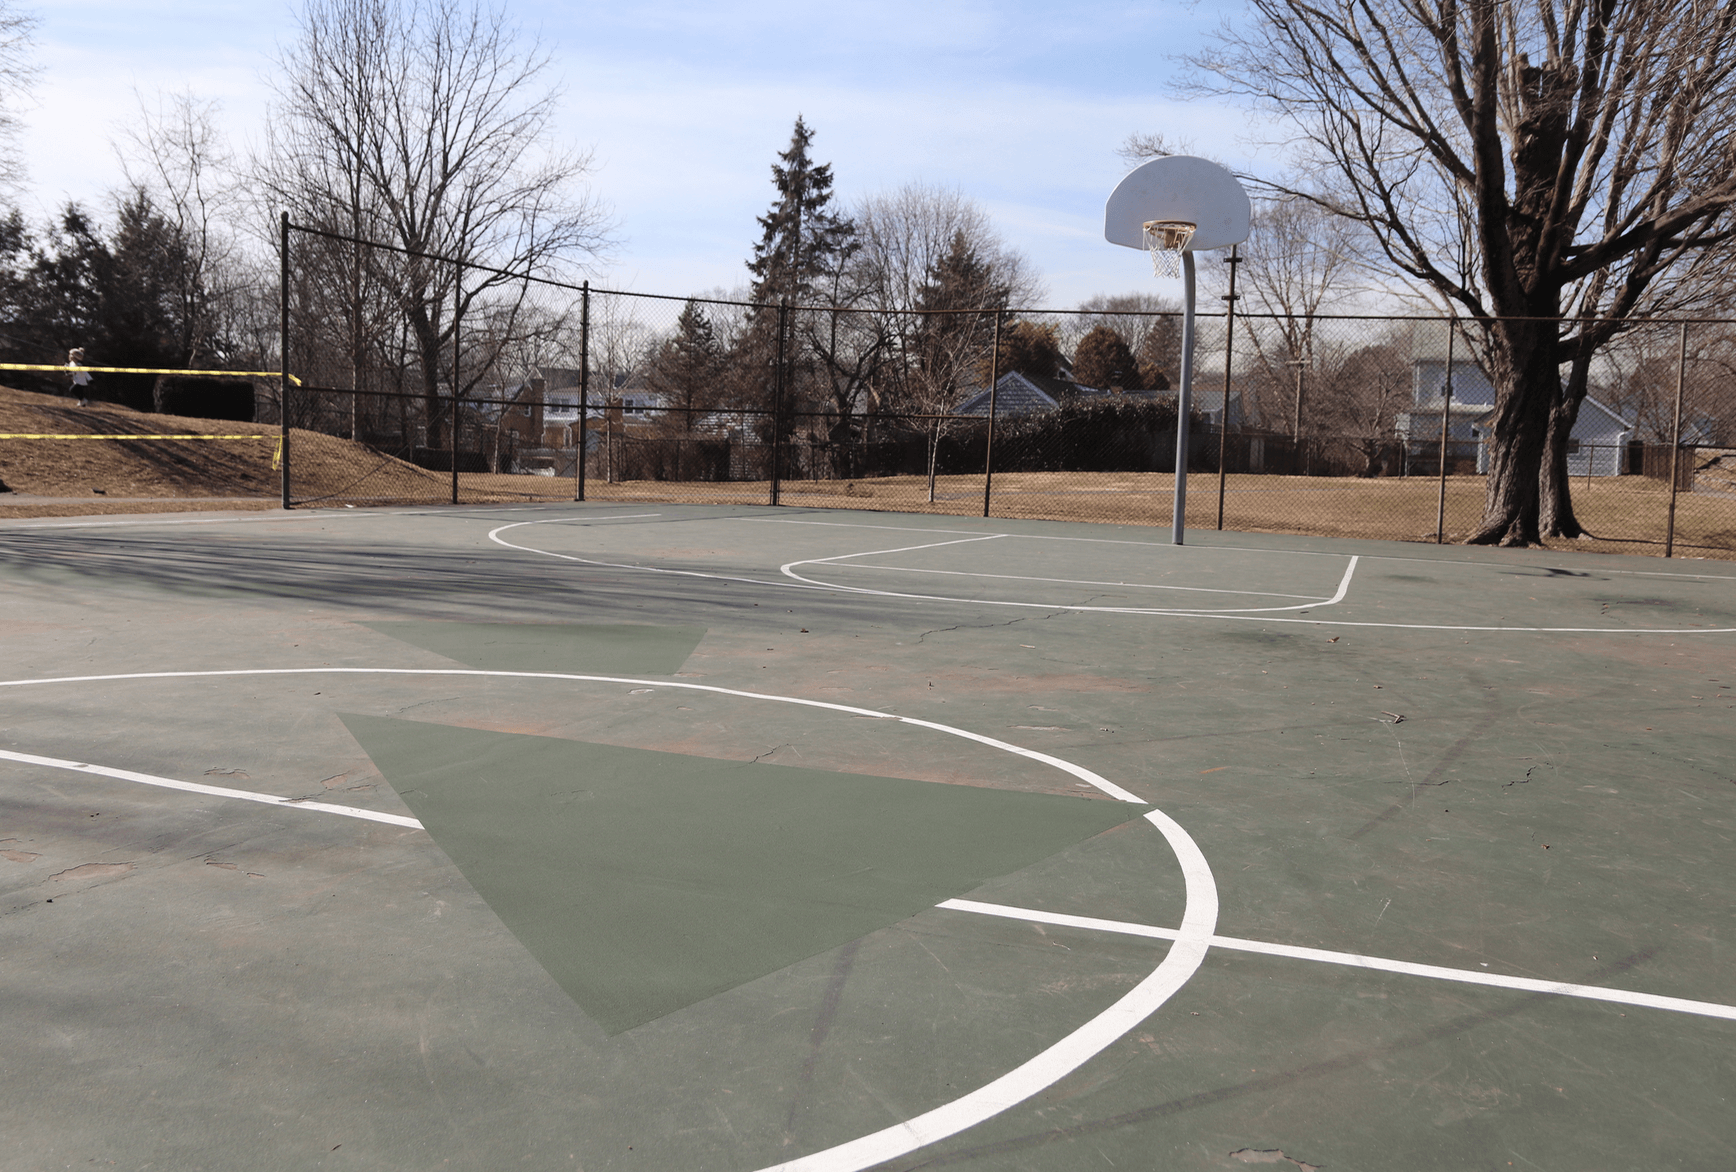 The graffiti at Bible Street Park was painted over by Hinding Tennis Courts, who are contracted with Greenwich Parks & Rec. Photo: Leslie Yager